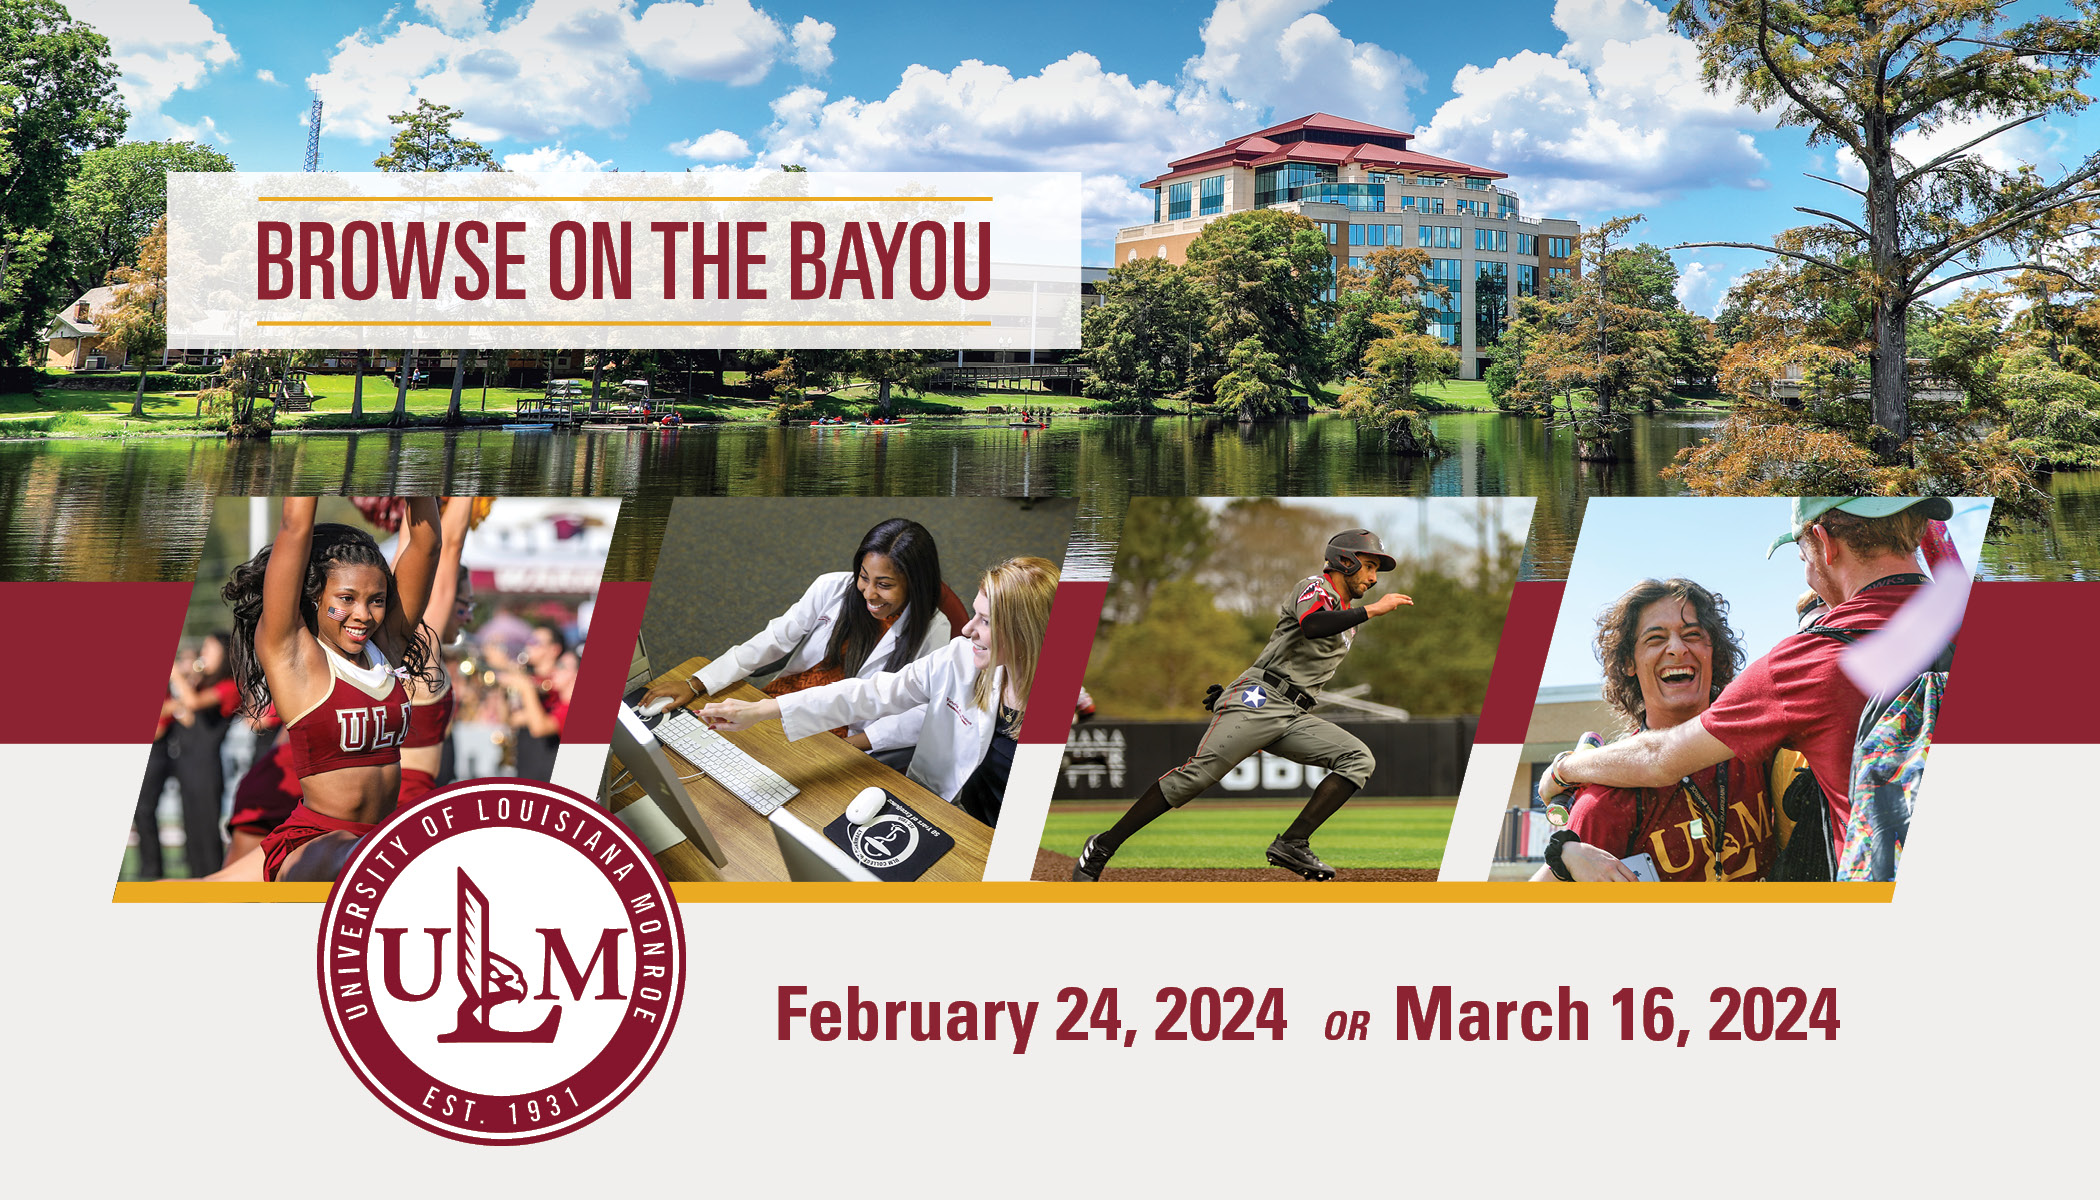 Four photos (a cheerleader, two students pointing at a computer, a baseball player, and two students smiling and embracing) layover an image of a tall building overlooking a bayou. People are kayaking on the bayou. 六合图库's logo is in the corner. Text reads, "February 24, 2024 or March 16, 2024"